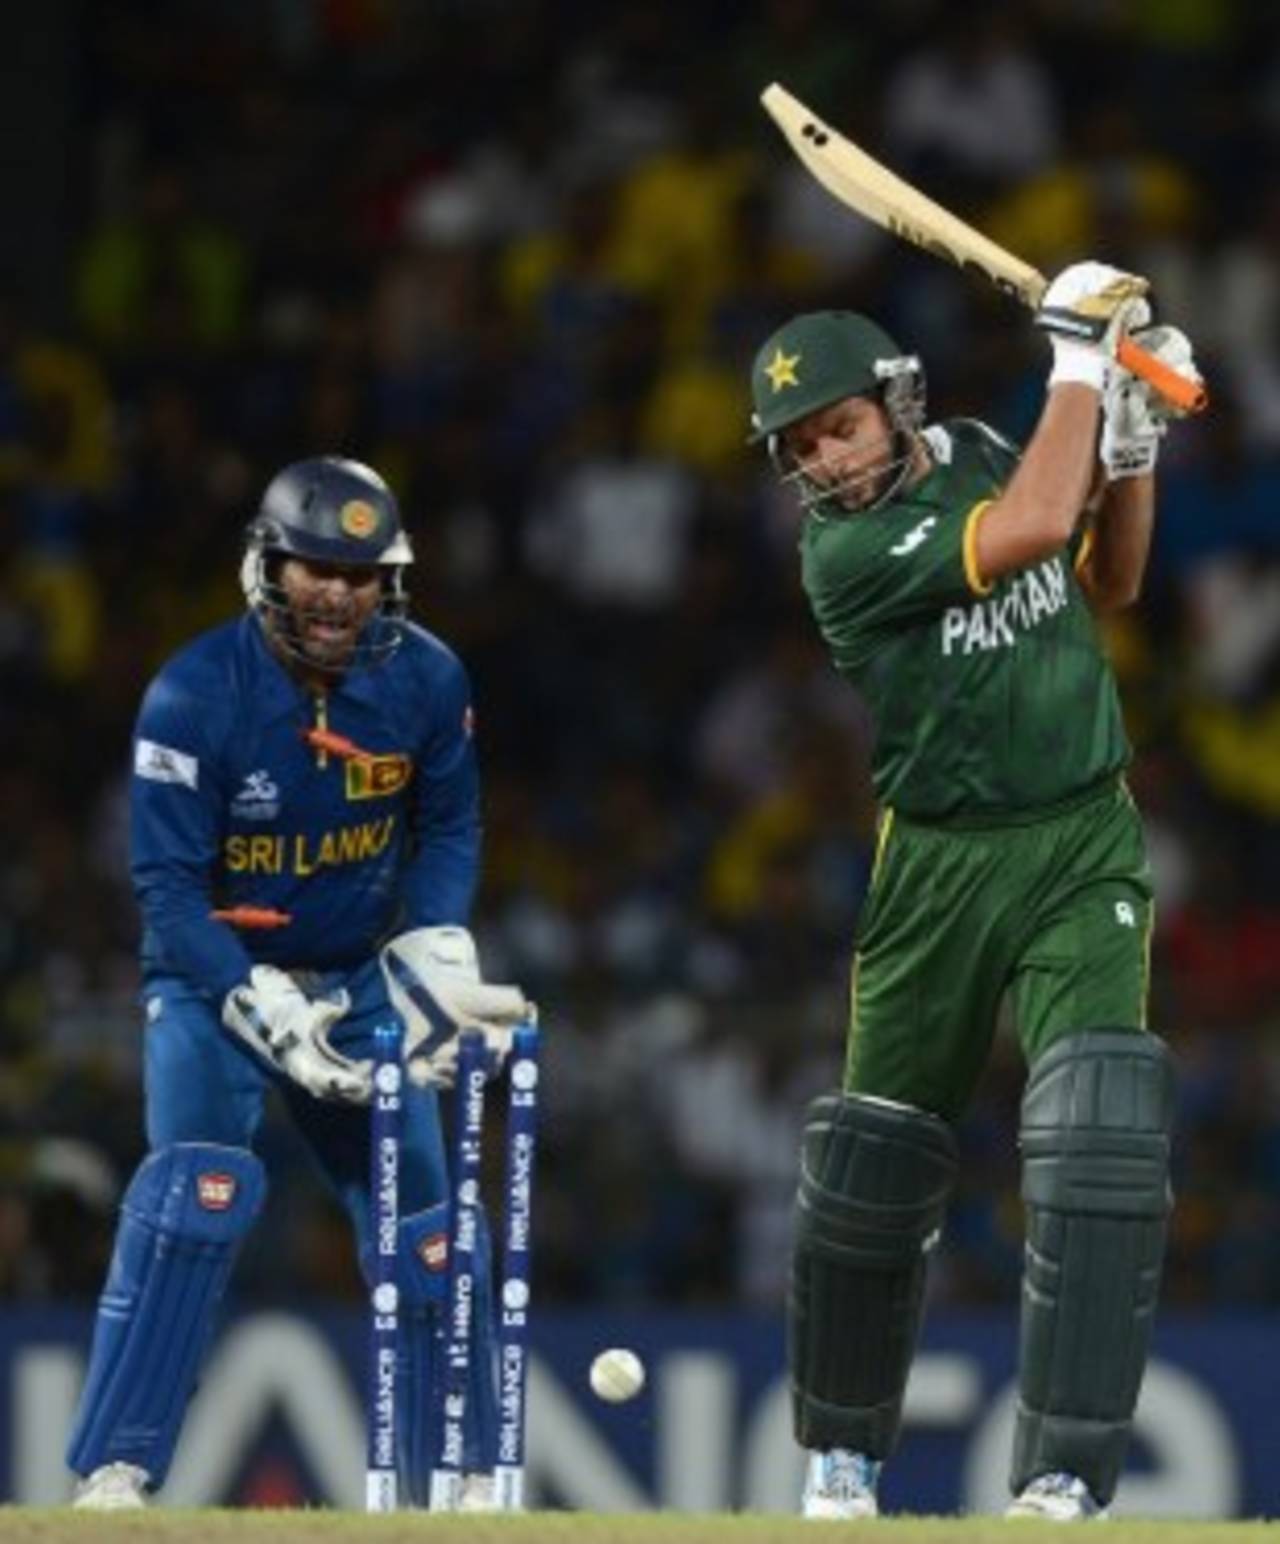 Shahid Afridi was dismissed first ball playing a careless shot on a tough pitch&nbsp;&nbsp;&bull;&nbsp;&nbsp;ICC/Getty